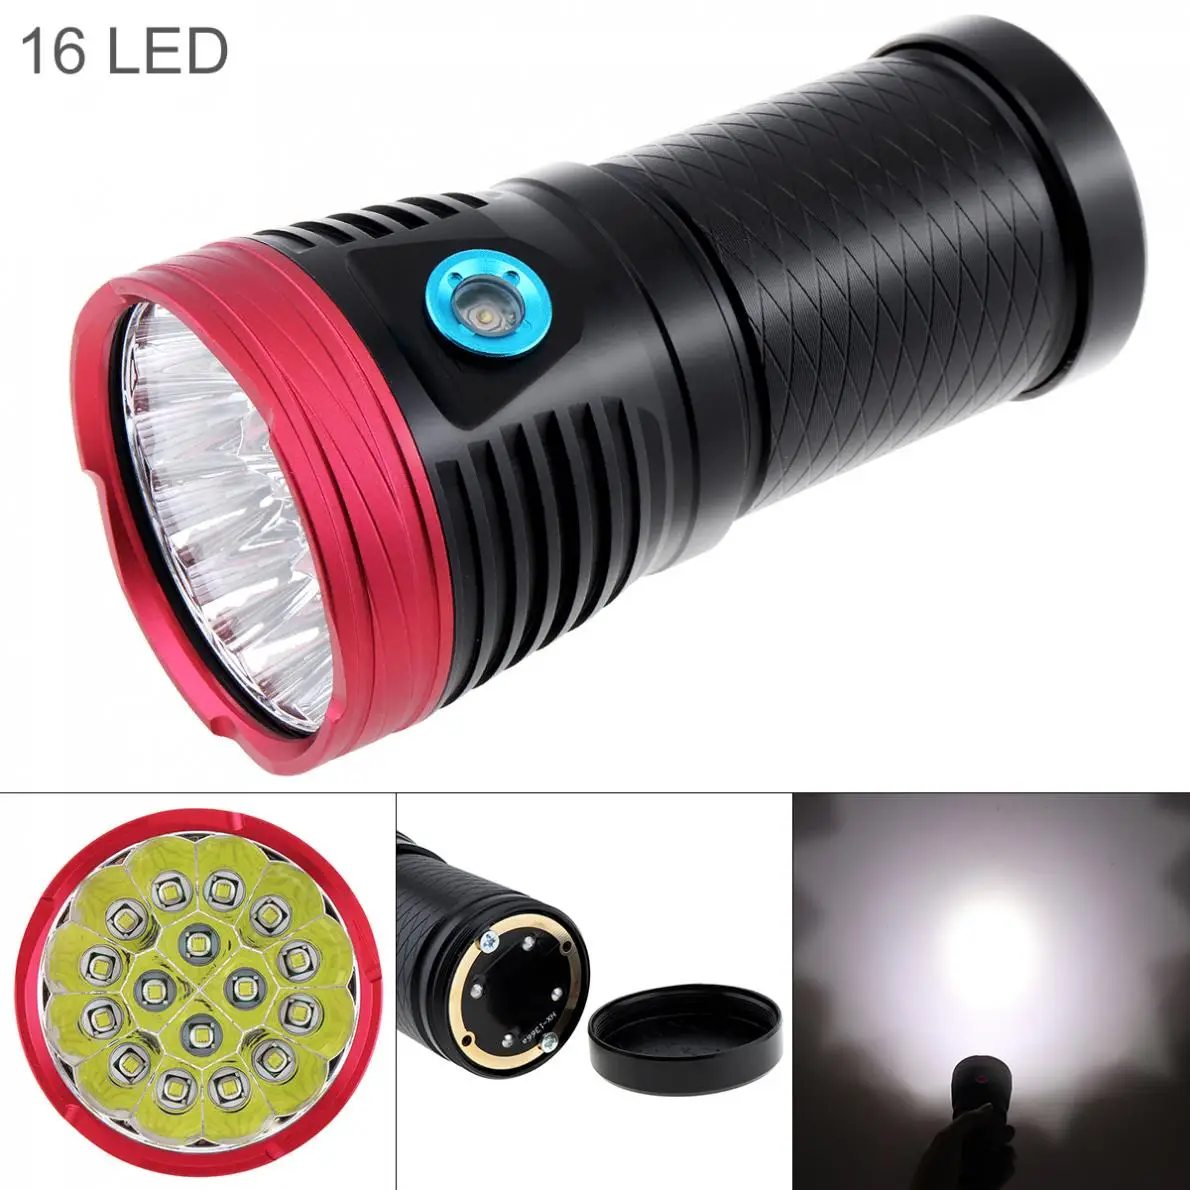 

16 XML-T6 LEDs 8000LM Ultra Bright Aluminum Waterproof Flashlight Torch with 4 Modes Light Support 18650 Rechargeable Battery